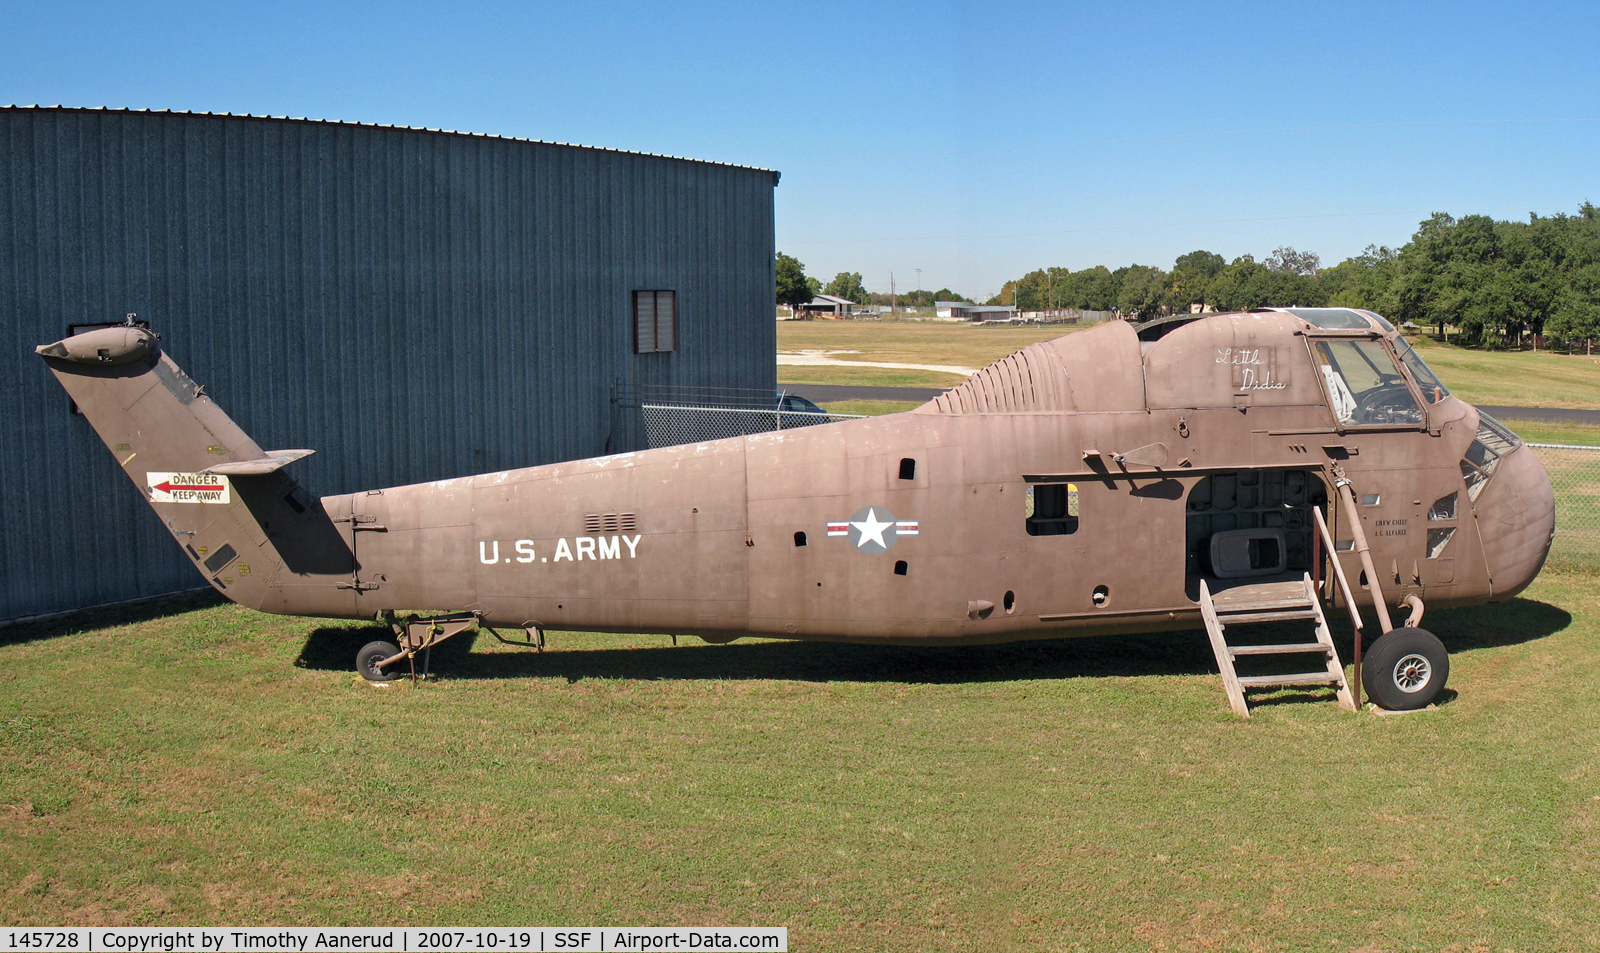 145728, Sikorsky UH-34E Seahorse C/N 58-896, Sikorsky H-34, Texas Air Museum, museum person said it was left behind by a company that moved to California, photo stitched from 2 images. BuNo 145728.  Being restored in Army colors. Was all white in 2001